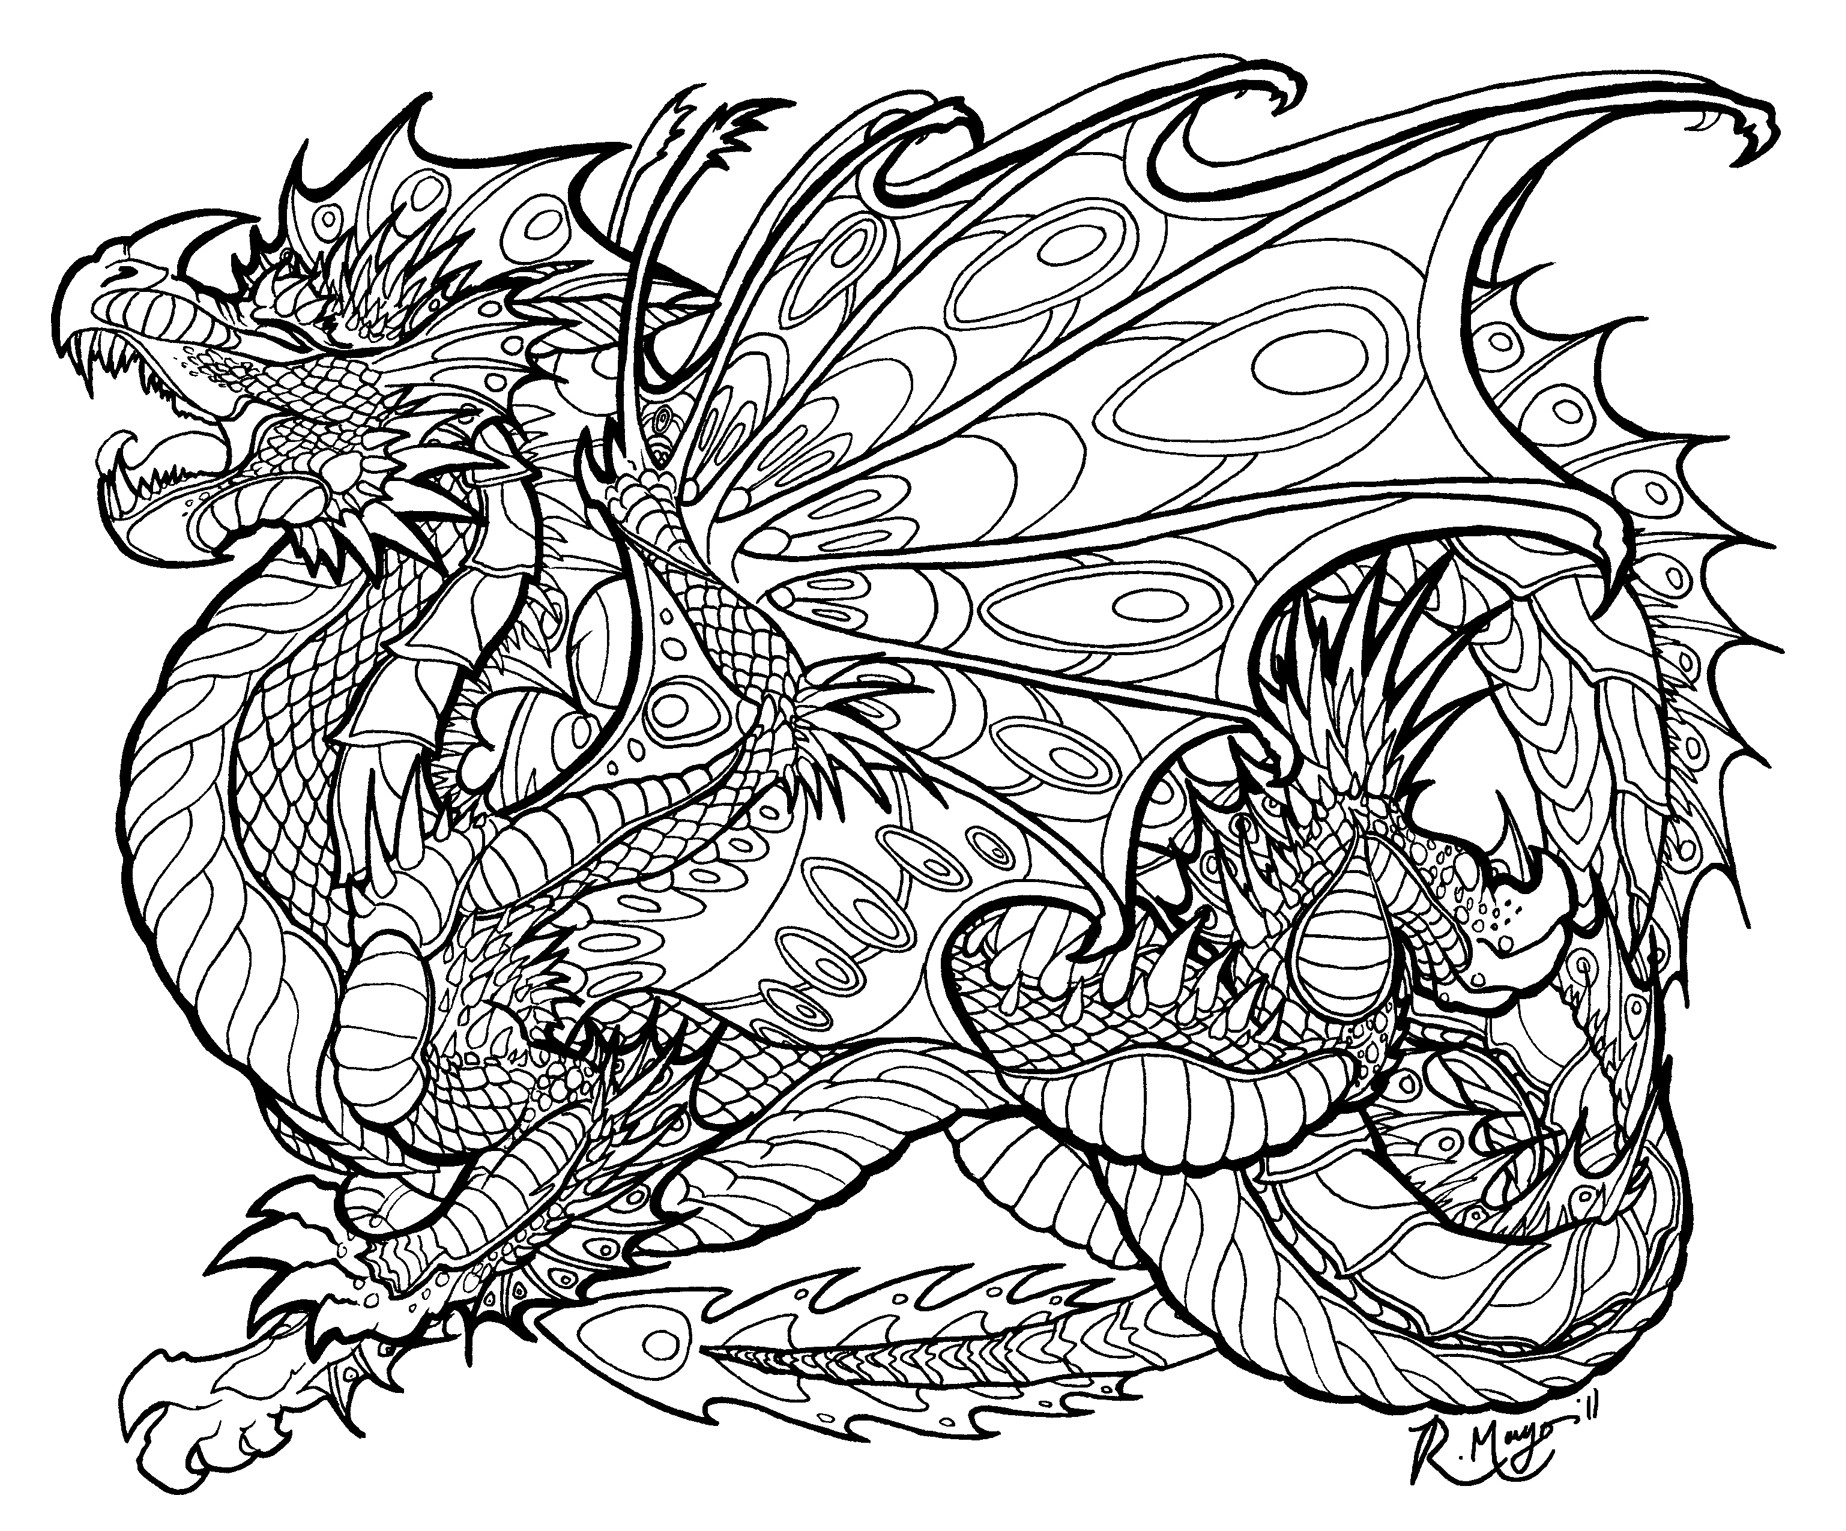 Mythical Creatures Coloring Pages For Adults
 Evil Dragon Coloring Pages for Adults to Print